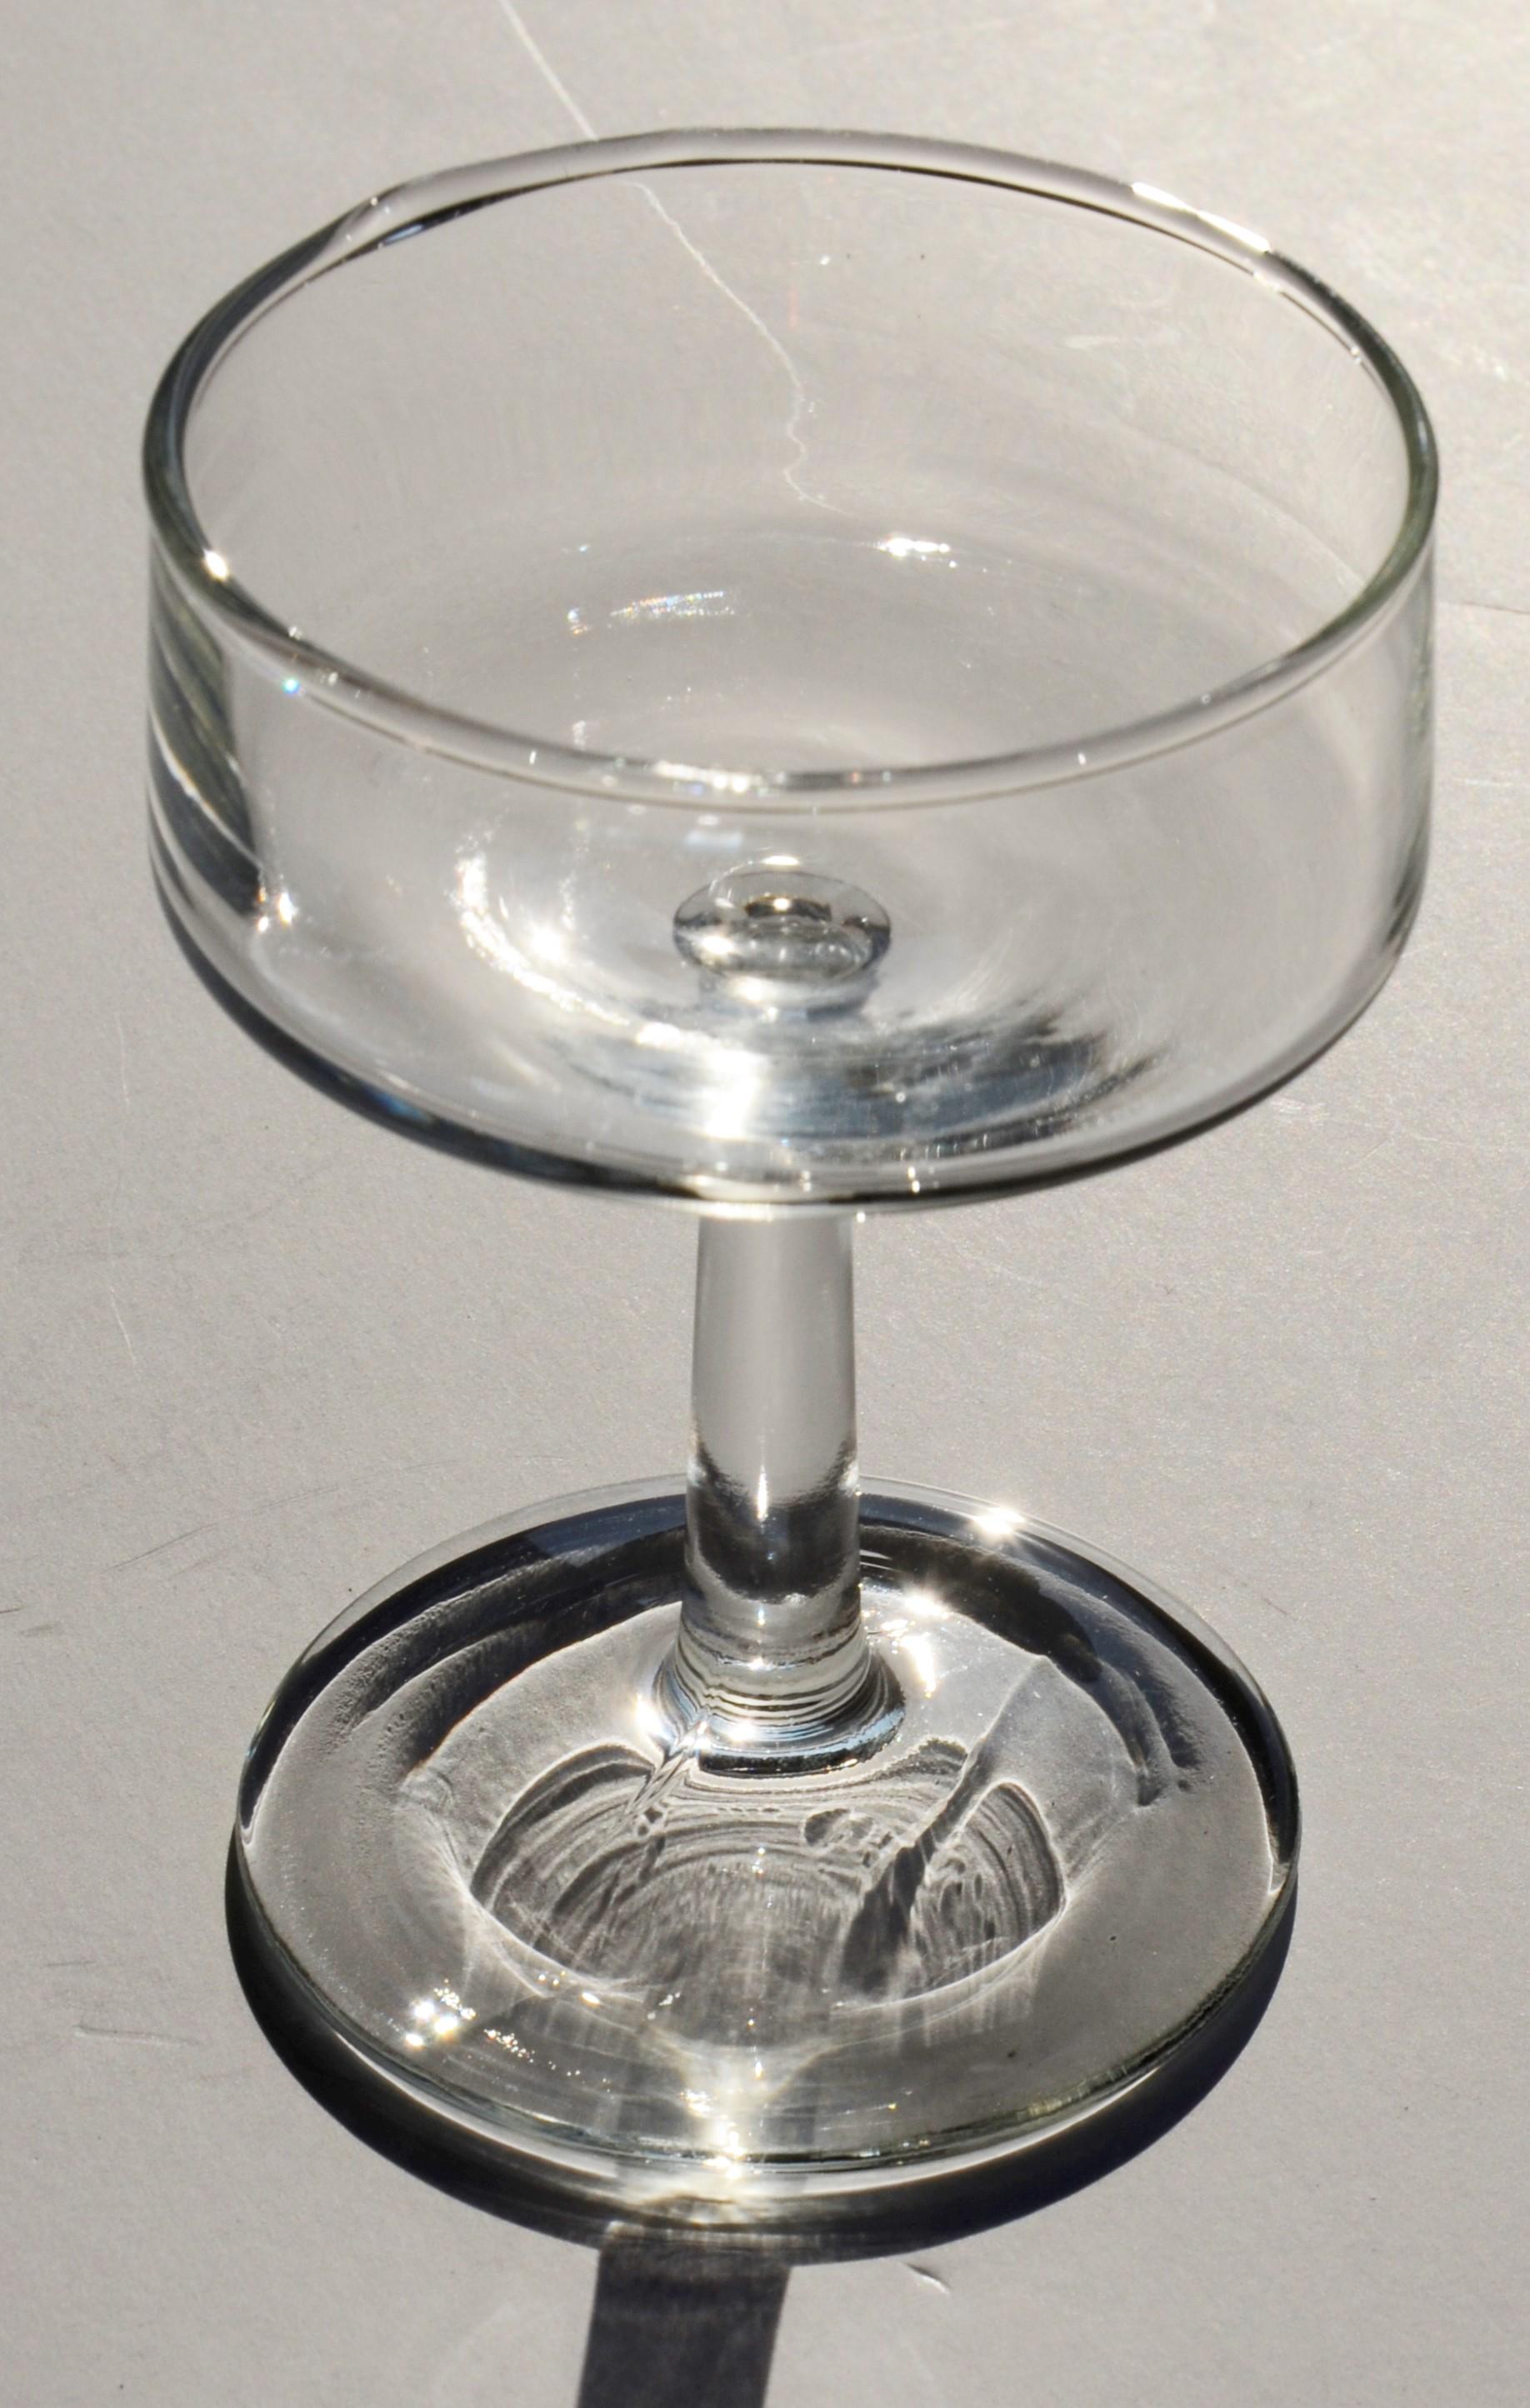 Set of 5 Minimalist Petite Glass Champagne Coupes / Sherbet Bowls with Stem In Good Condition For Sale In Houston, TX